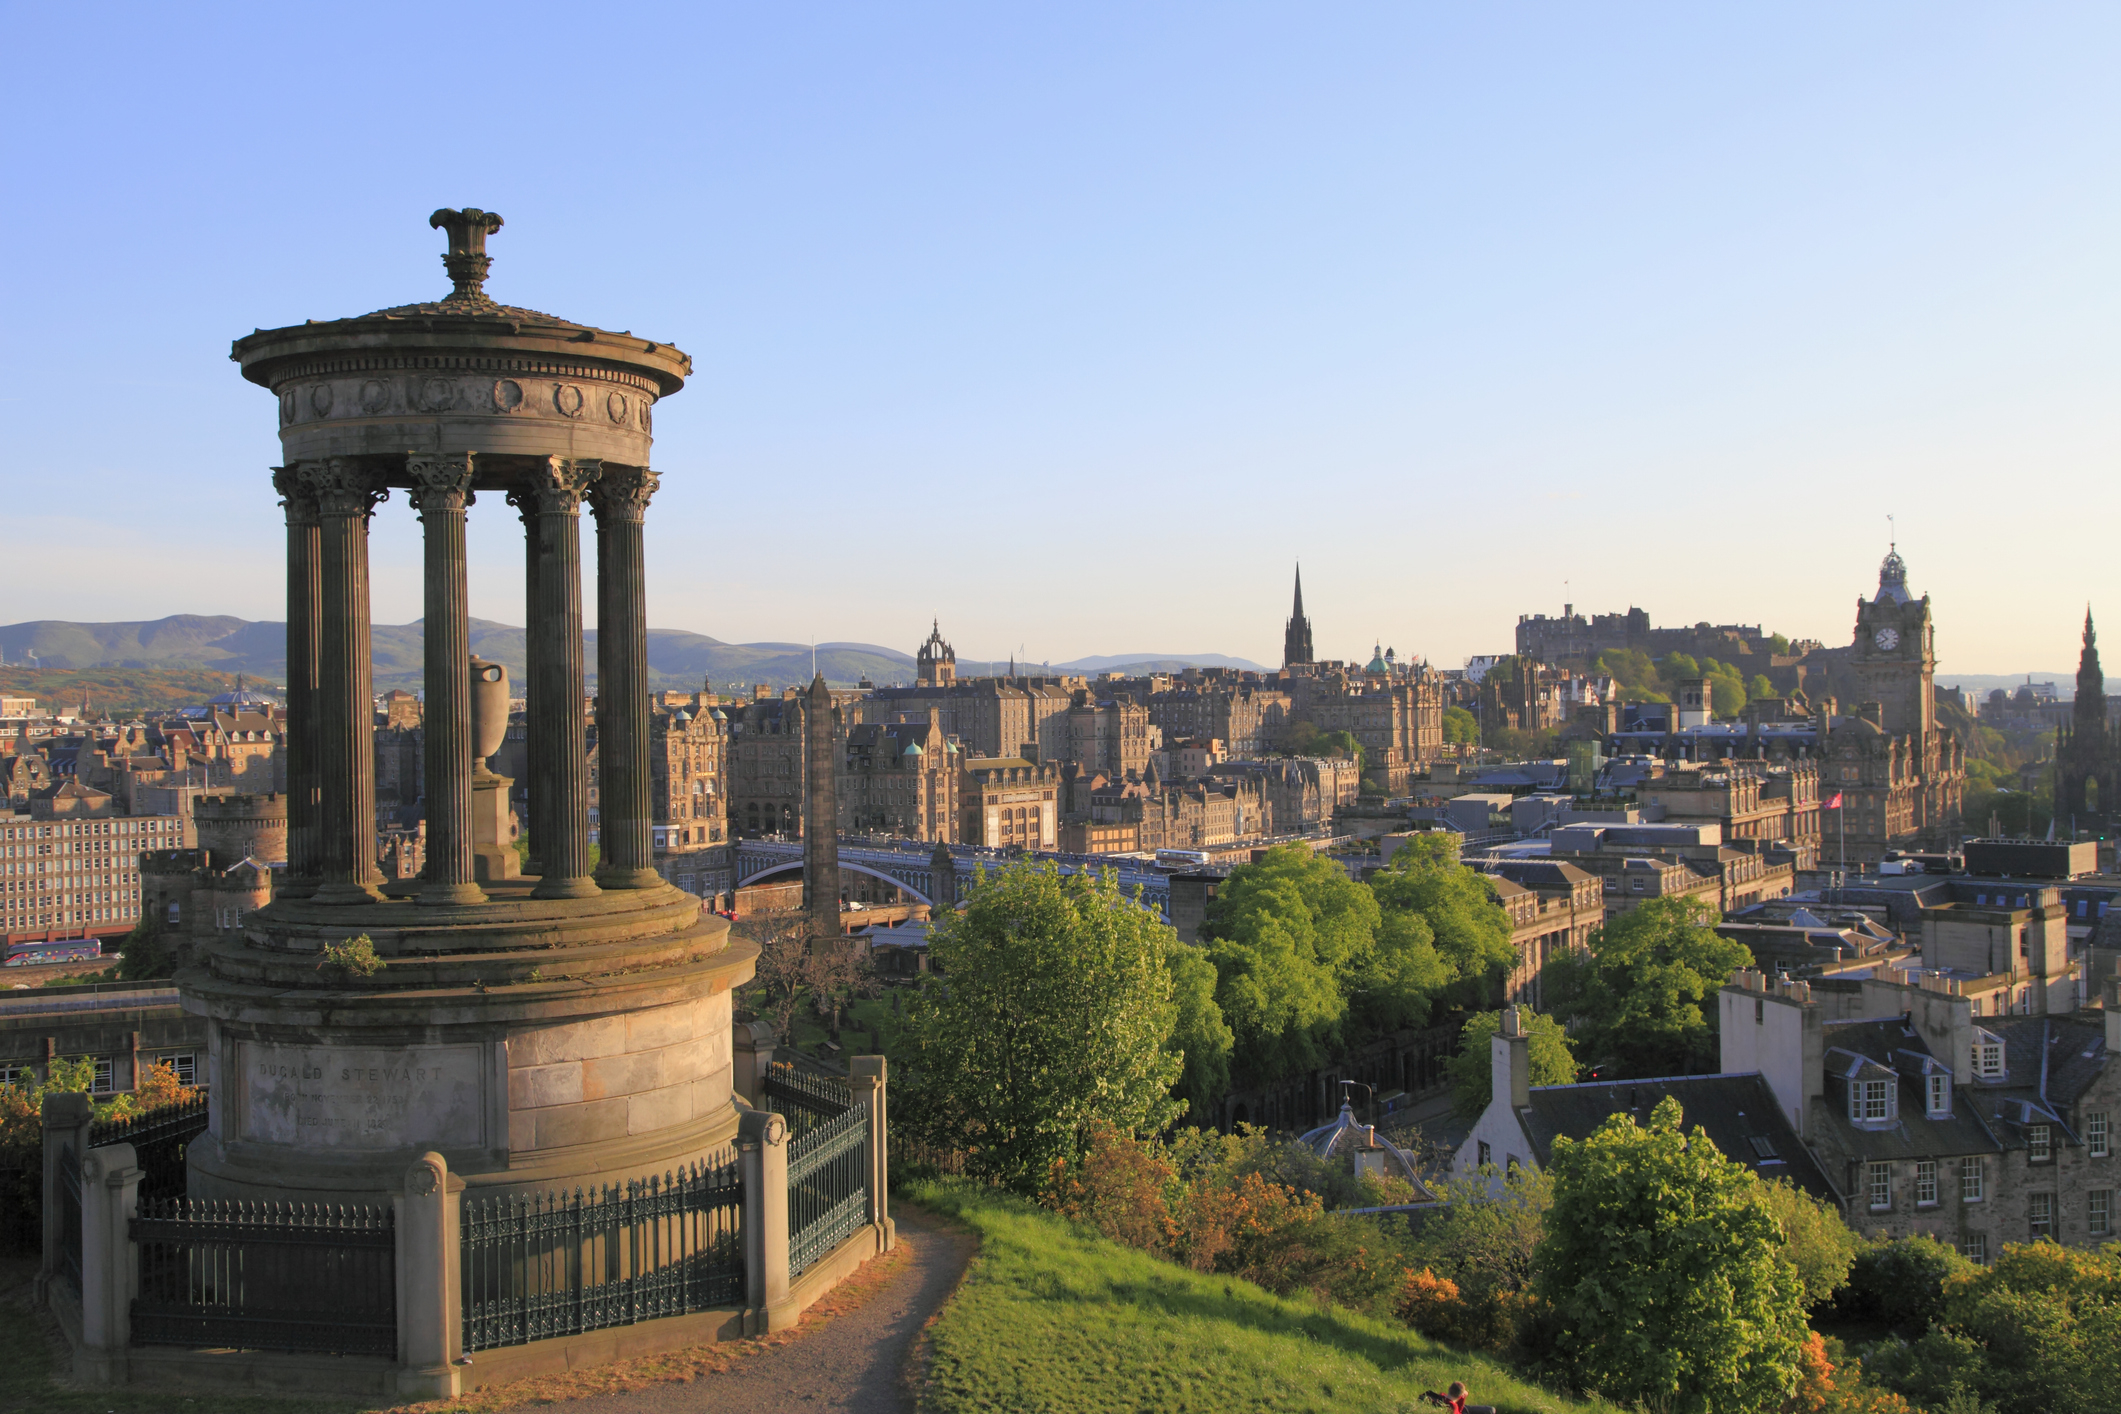 A panoramic view of Edinburgh with the Dugald Stewart Monument in the foreground